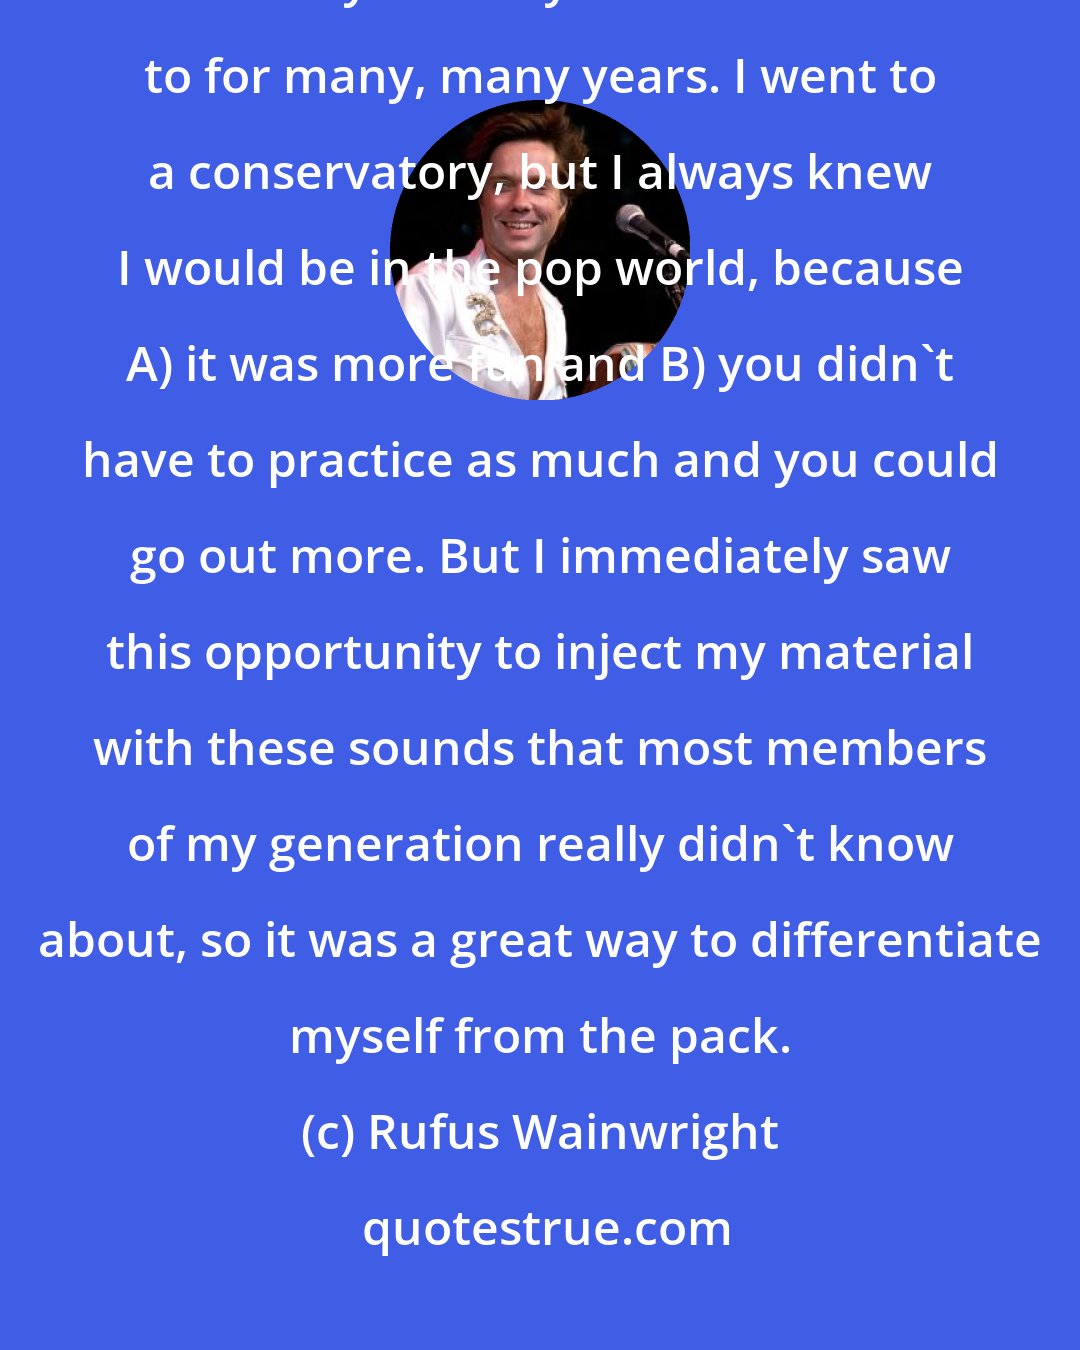 Rufus Wainwright: My love of classical hit pretty early. I was 13 when it occurred, and that was really the only music I listened to for many, many years. I went to a conservatory, but I always knew I would be in the pop world, because A) it was more fun and B) you didn't have to practice as much and you could go out more. But I immediately saw this opportunity to inject my material with these sounds that most members of my generation really didn't know about, so it was a great way to differentiate myself from the pack.